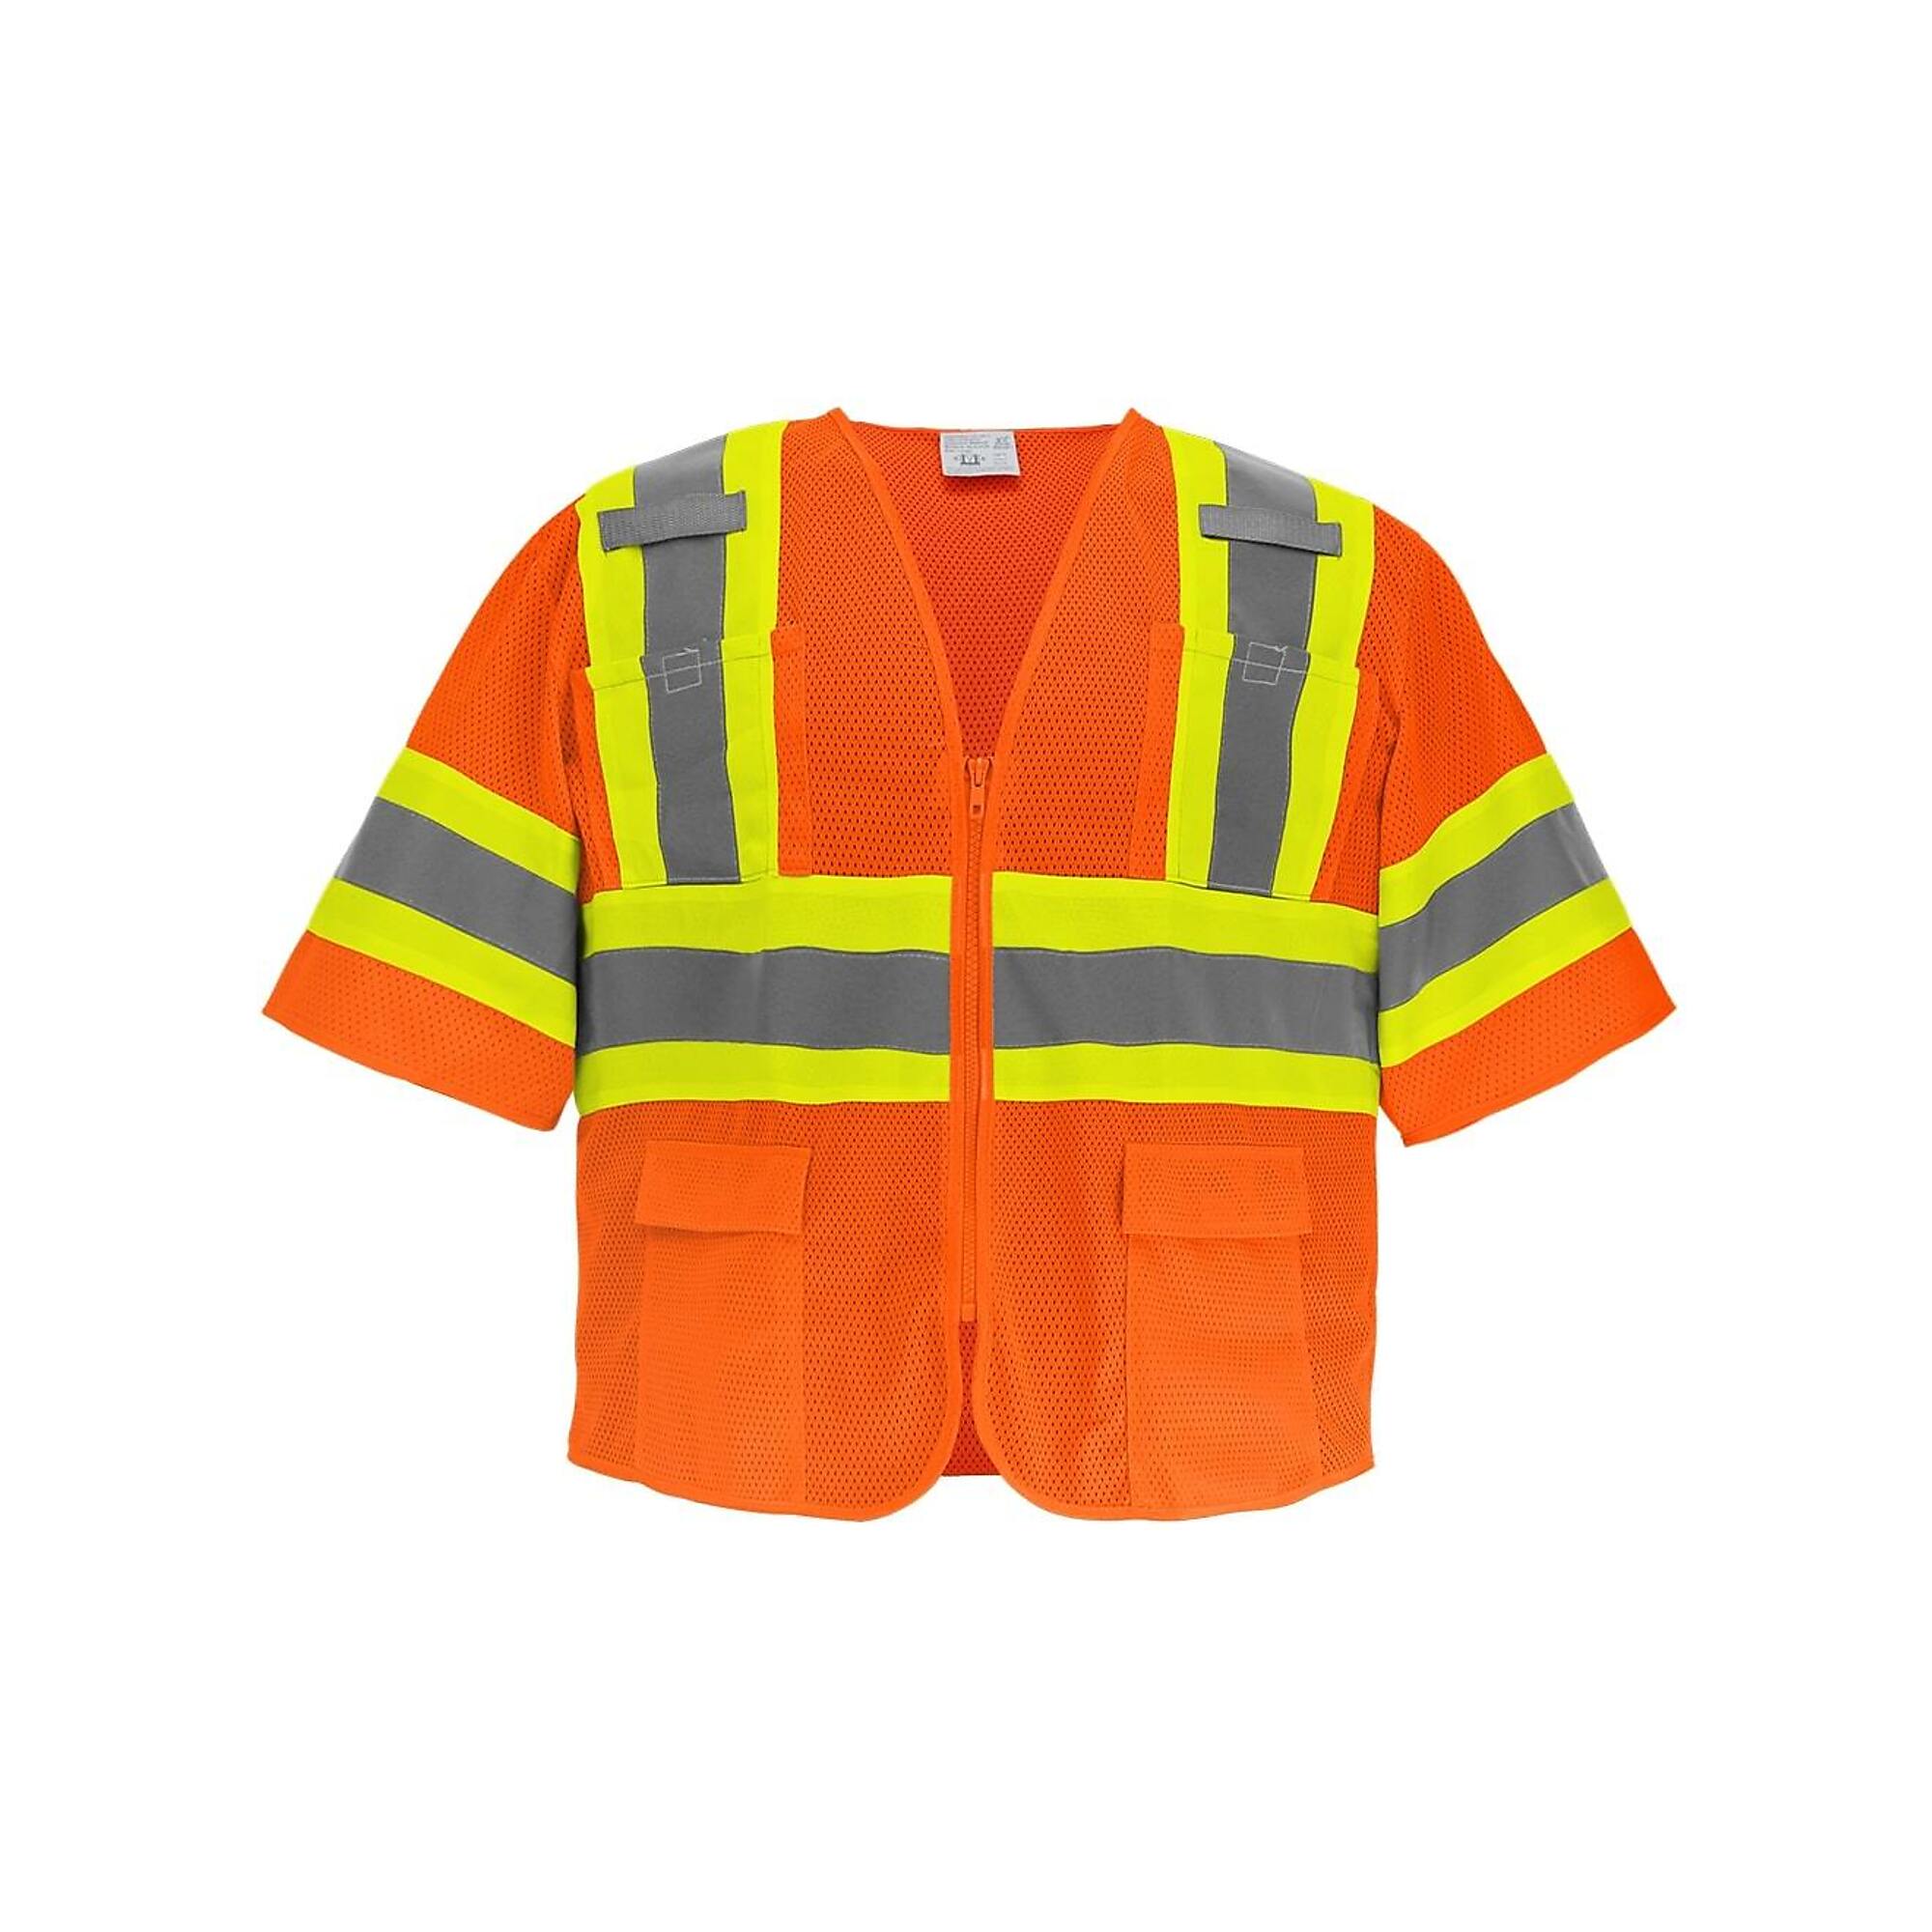 FrogWear, HV Orange, Class 3 6 Pockets, With Sleeves Mesh Vest, Size S, Color High-Visibility Orange, Model GLO-0145-S